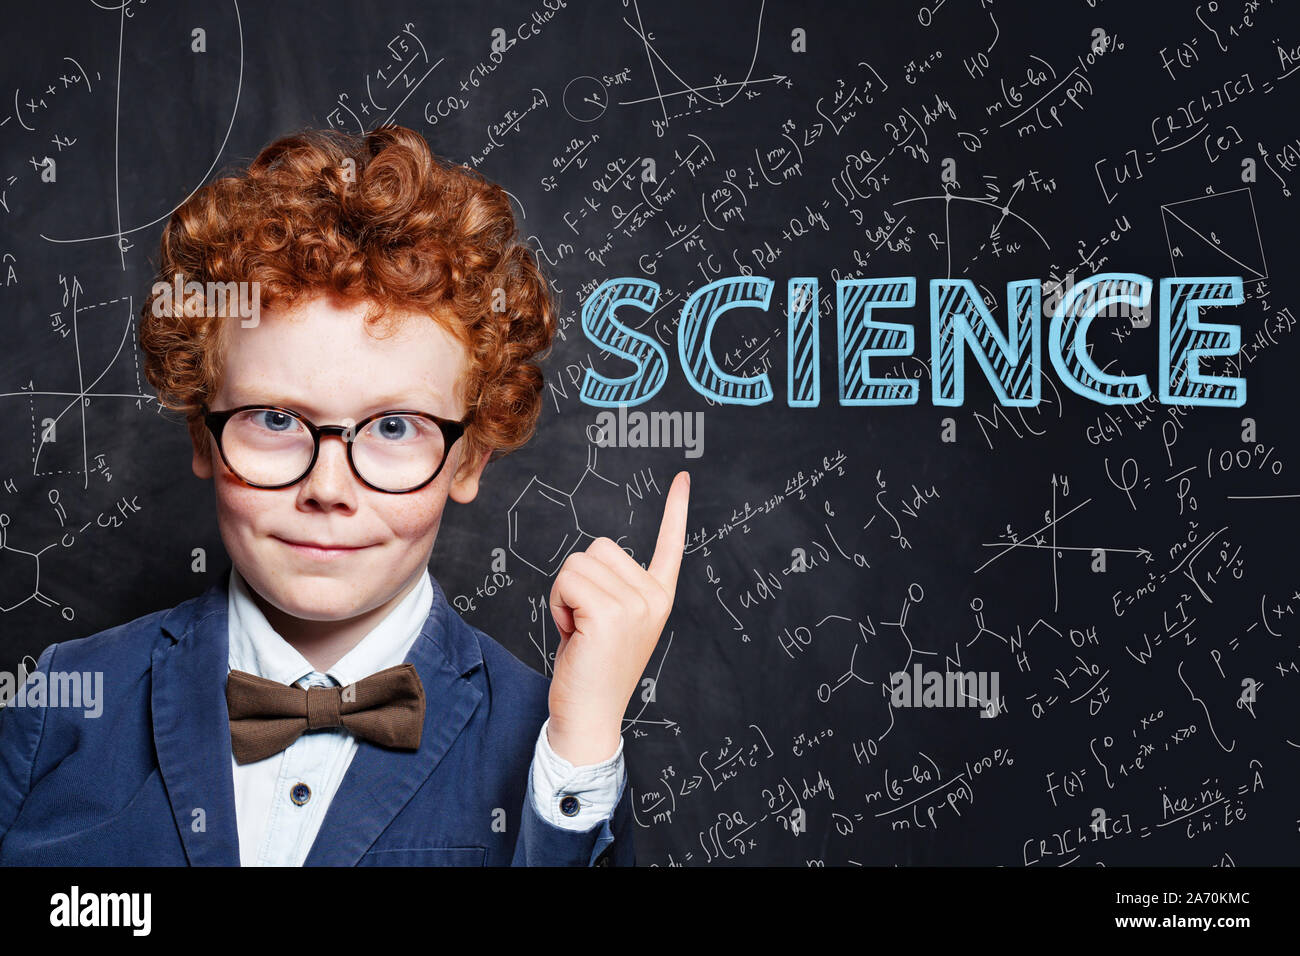 Confident kid little boy with ginger hair pointing at science inscription on chalkkboard background Stock Photo